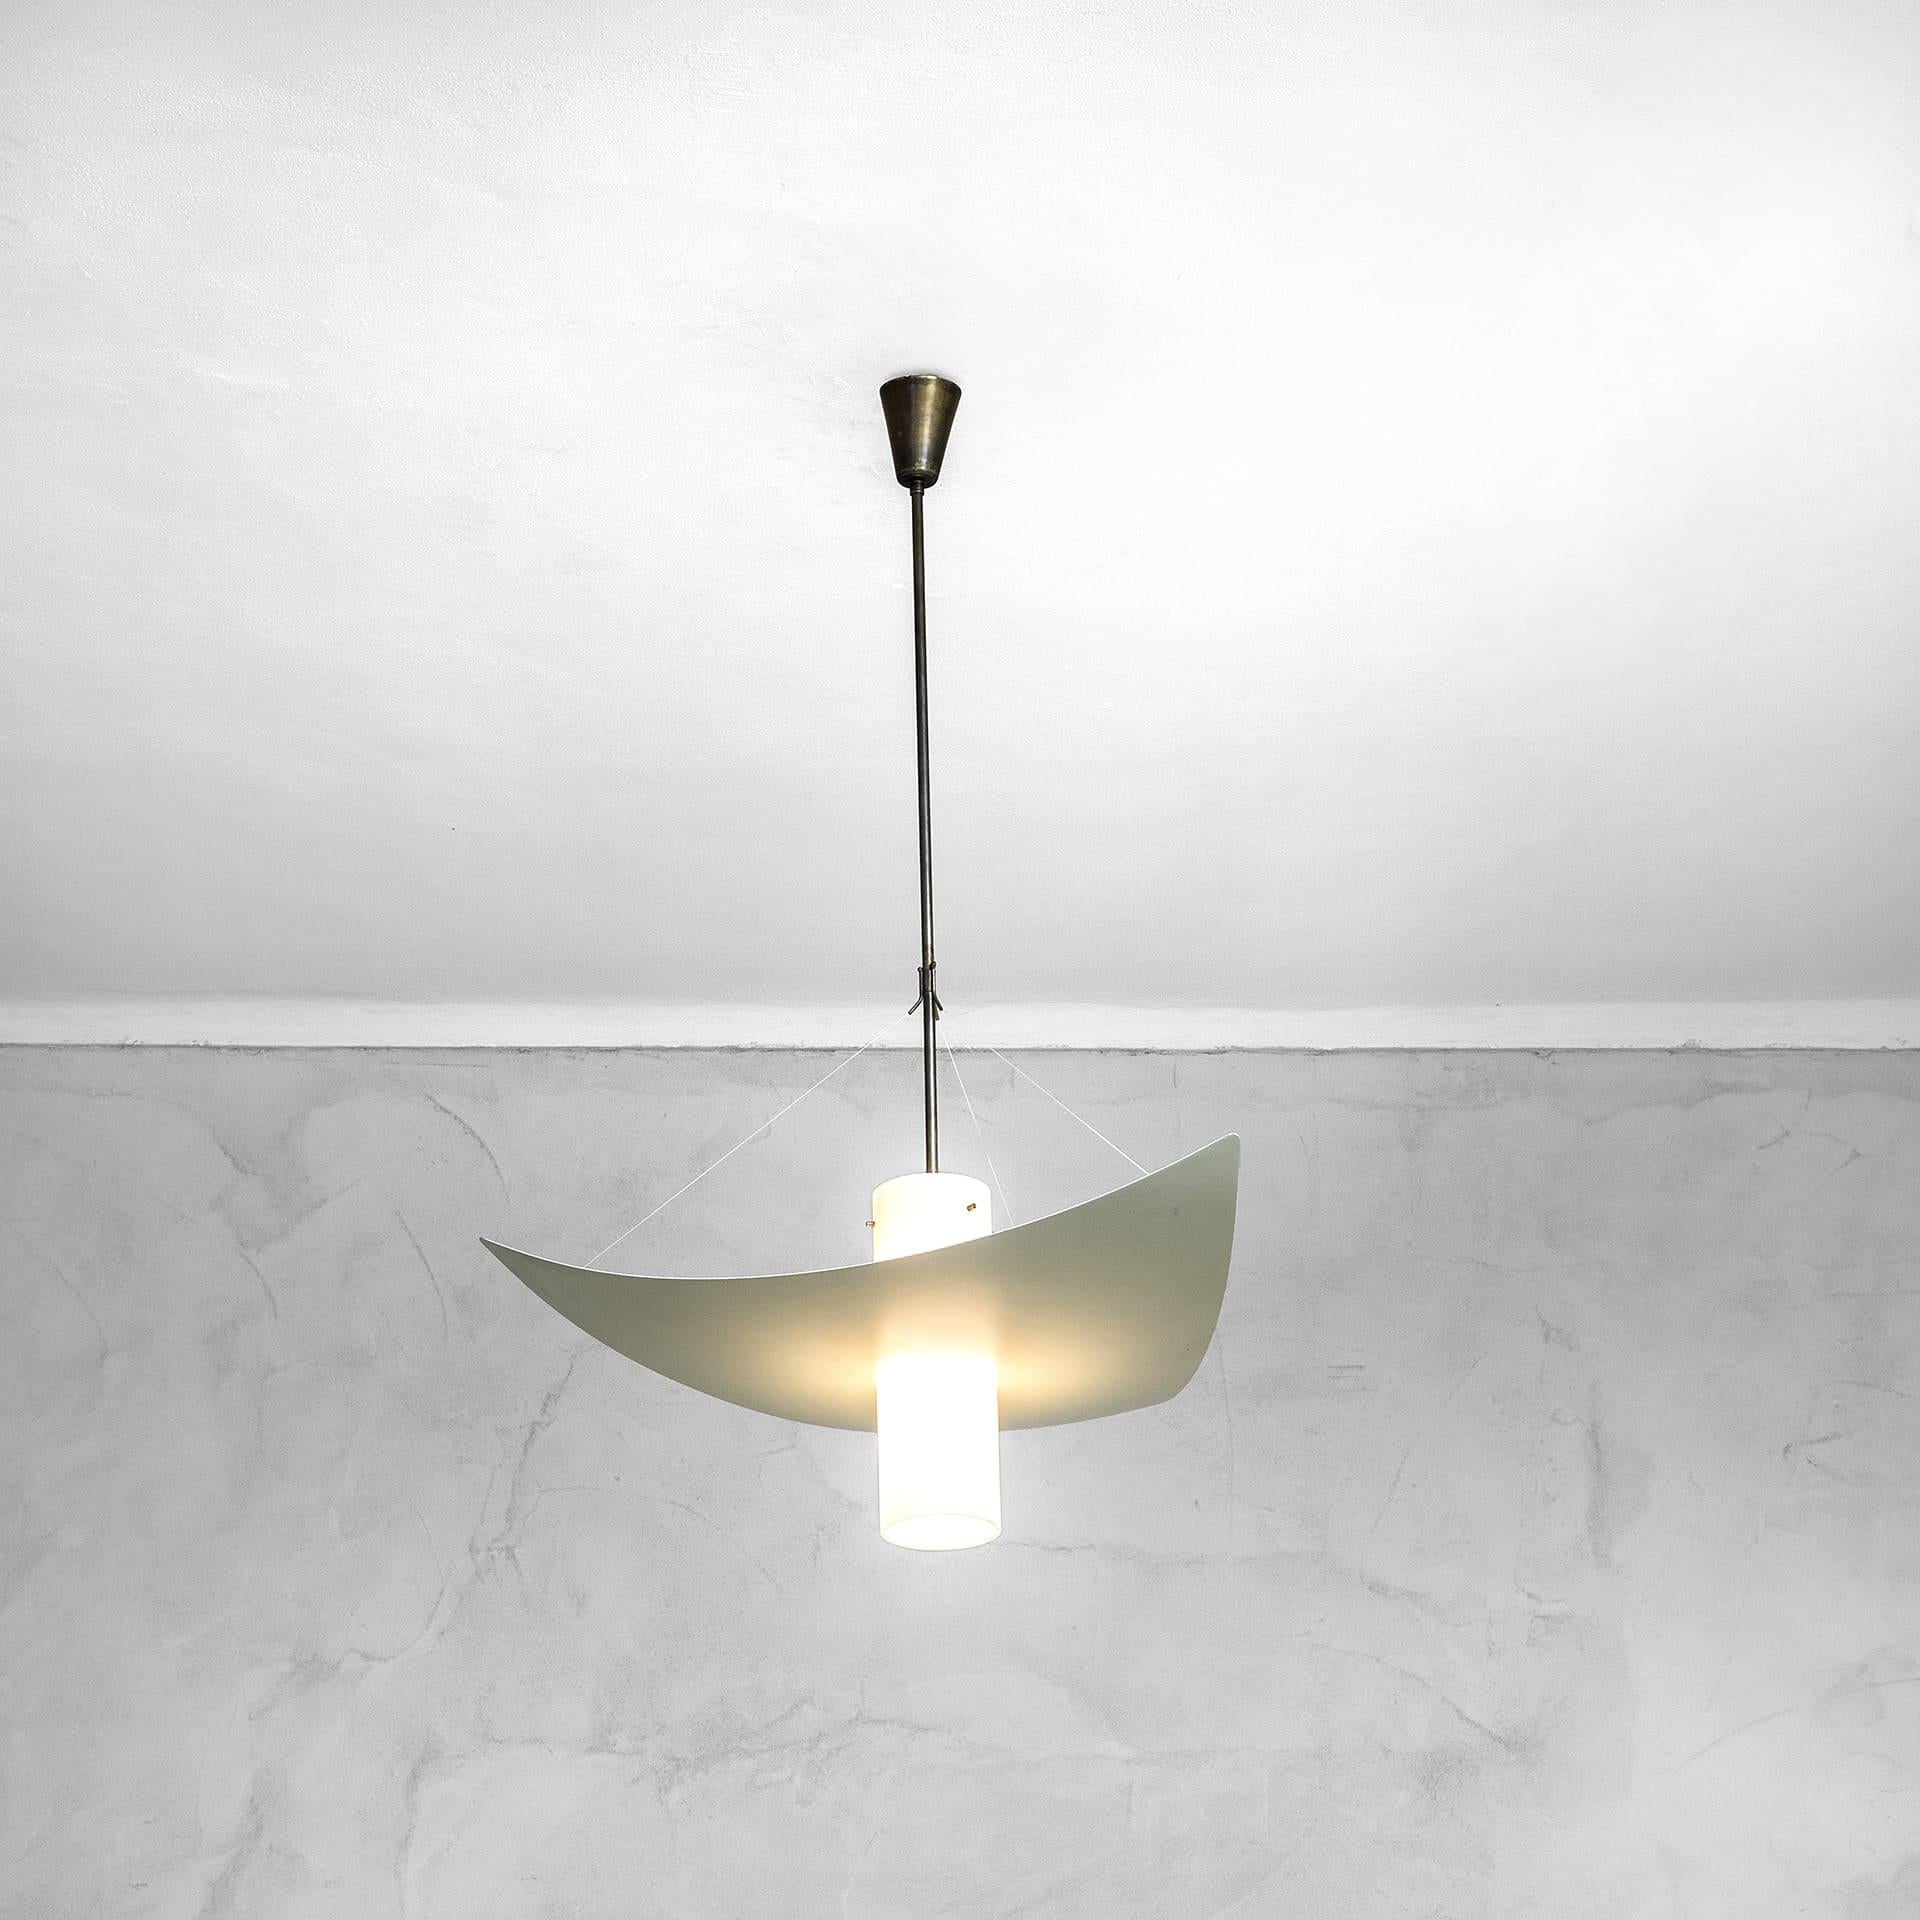 Angelo Lelii became an influential designer in postwar Italy, especially in the field of modern lighting design. In the 1947 He founded  Arredoluce, a premier manufacturer of forniture and lighting. 
Angelo Lelii’s lamps and lighting objects stand